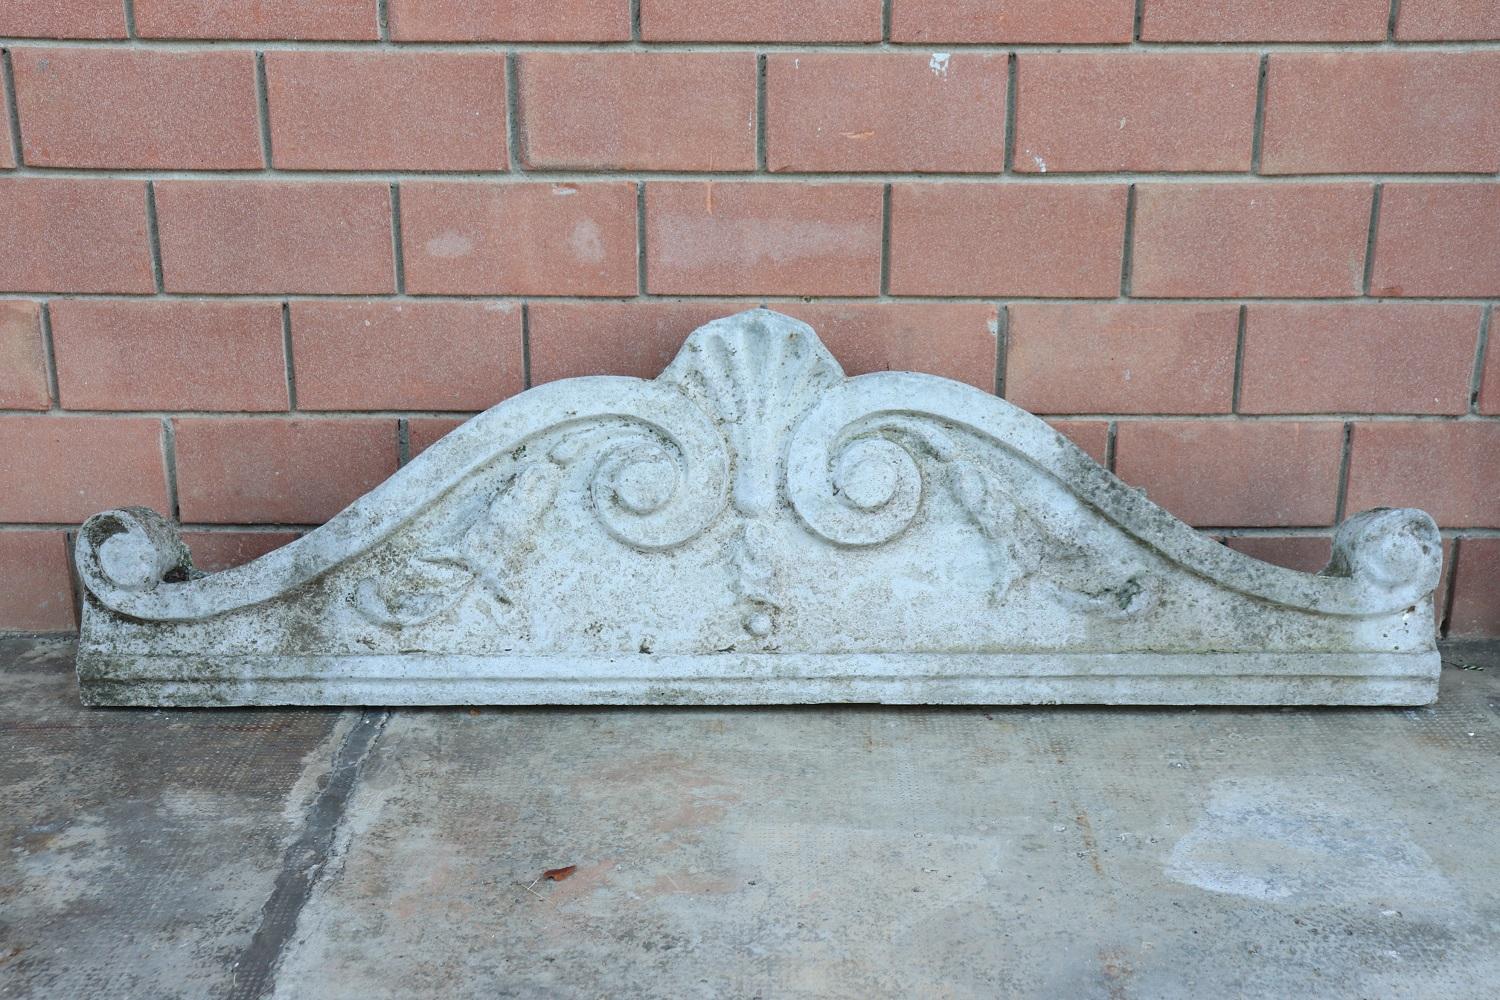 Beautiful refined baroque style outdoor architectural frieze, circa 1920s in cement. Beautiful baroque revival with curls, swirls and a large central shell. This type of architectural element was usually positioned above a door. Shows signs of the